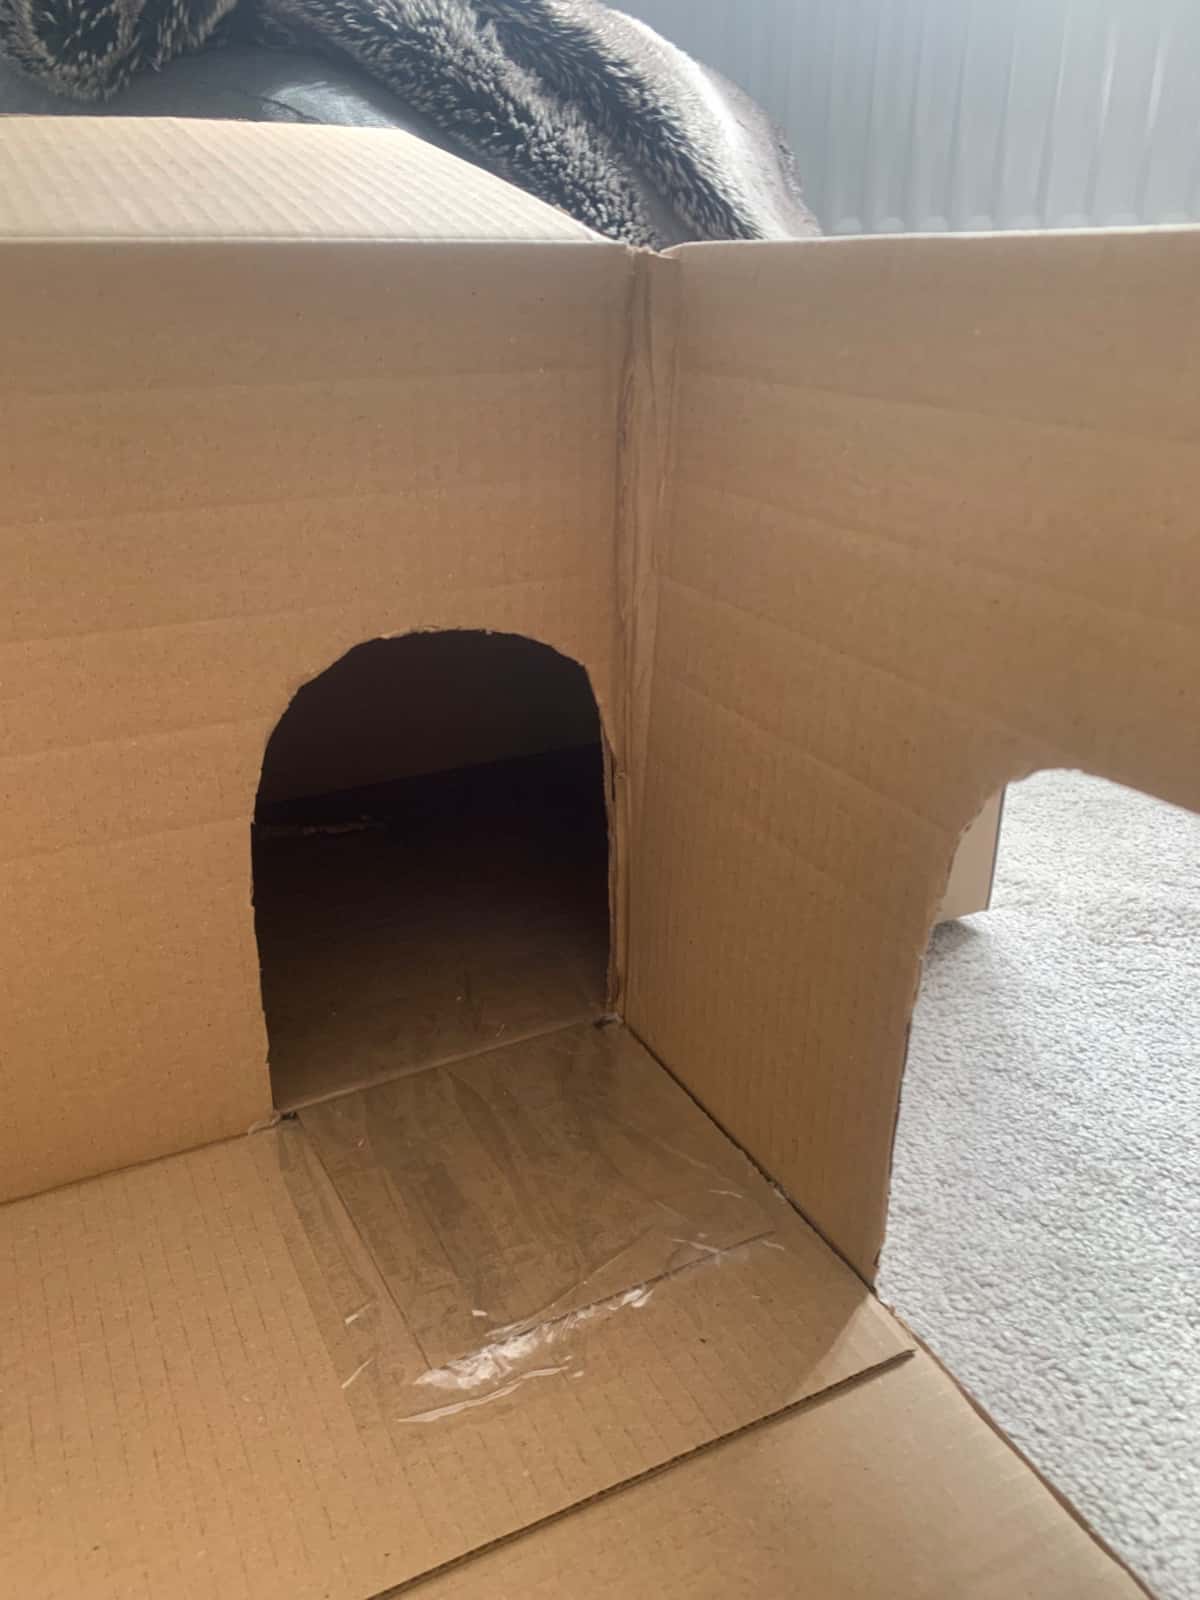 How To Make a Cardboard Cat House